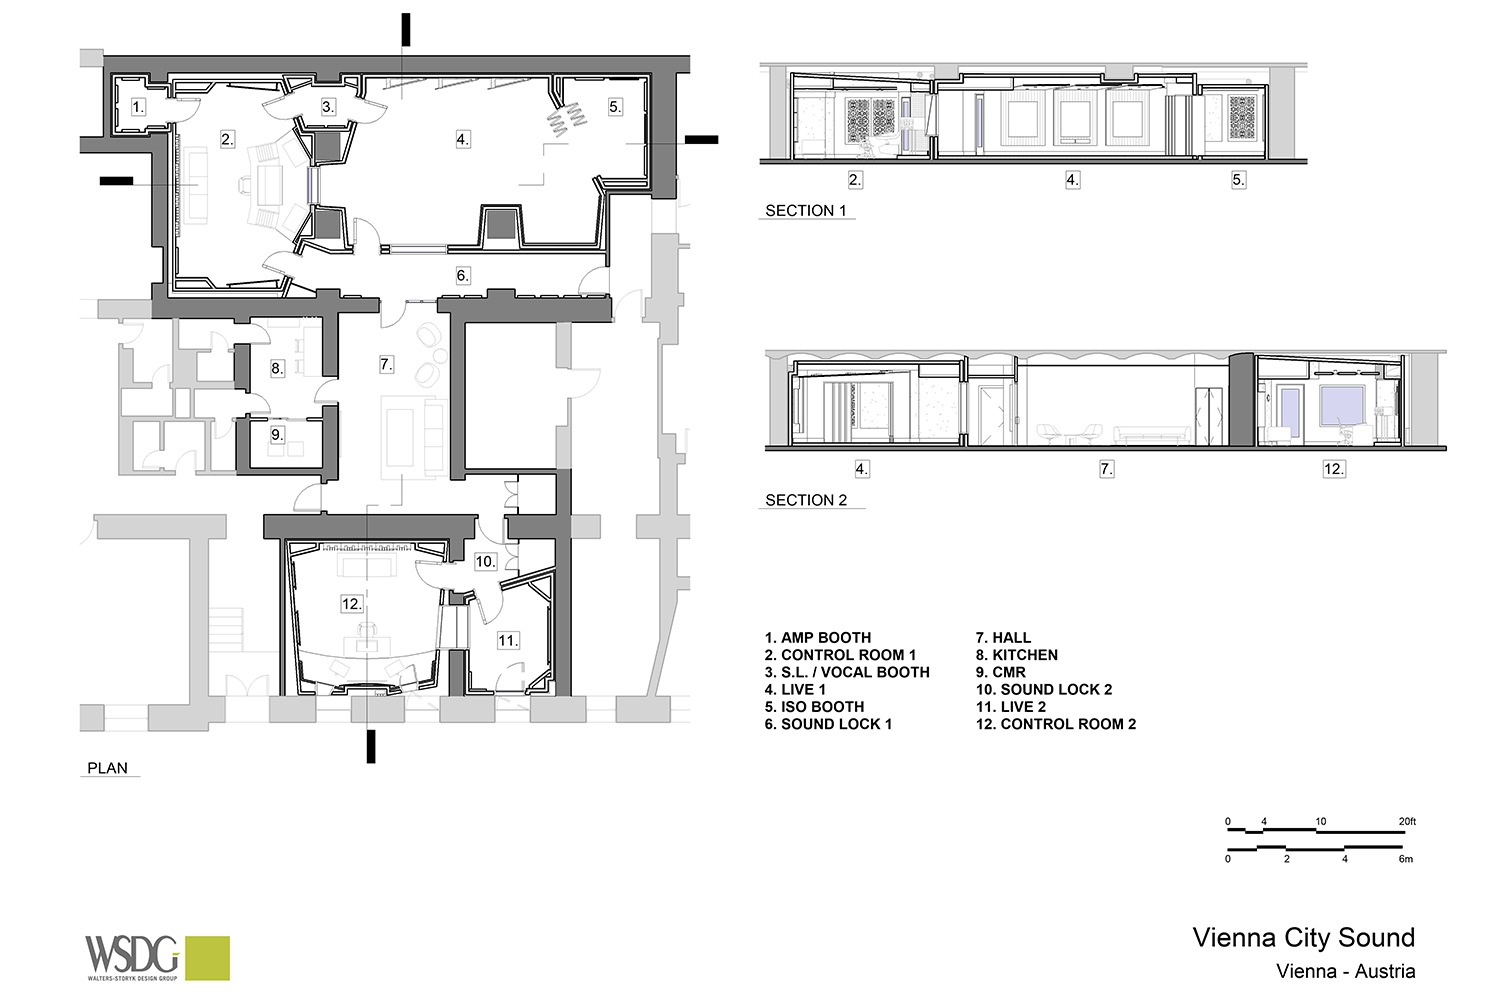 Vienna City Sound is a twelve-room recording studio built in the basement of a vintage commercial building in the heart of Vienna. Owner Peter Zimmerl’s retained the services of WSDG to design his dream studio. Presentation drawing 2.